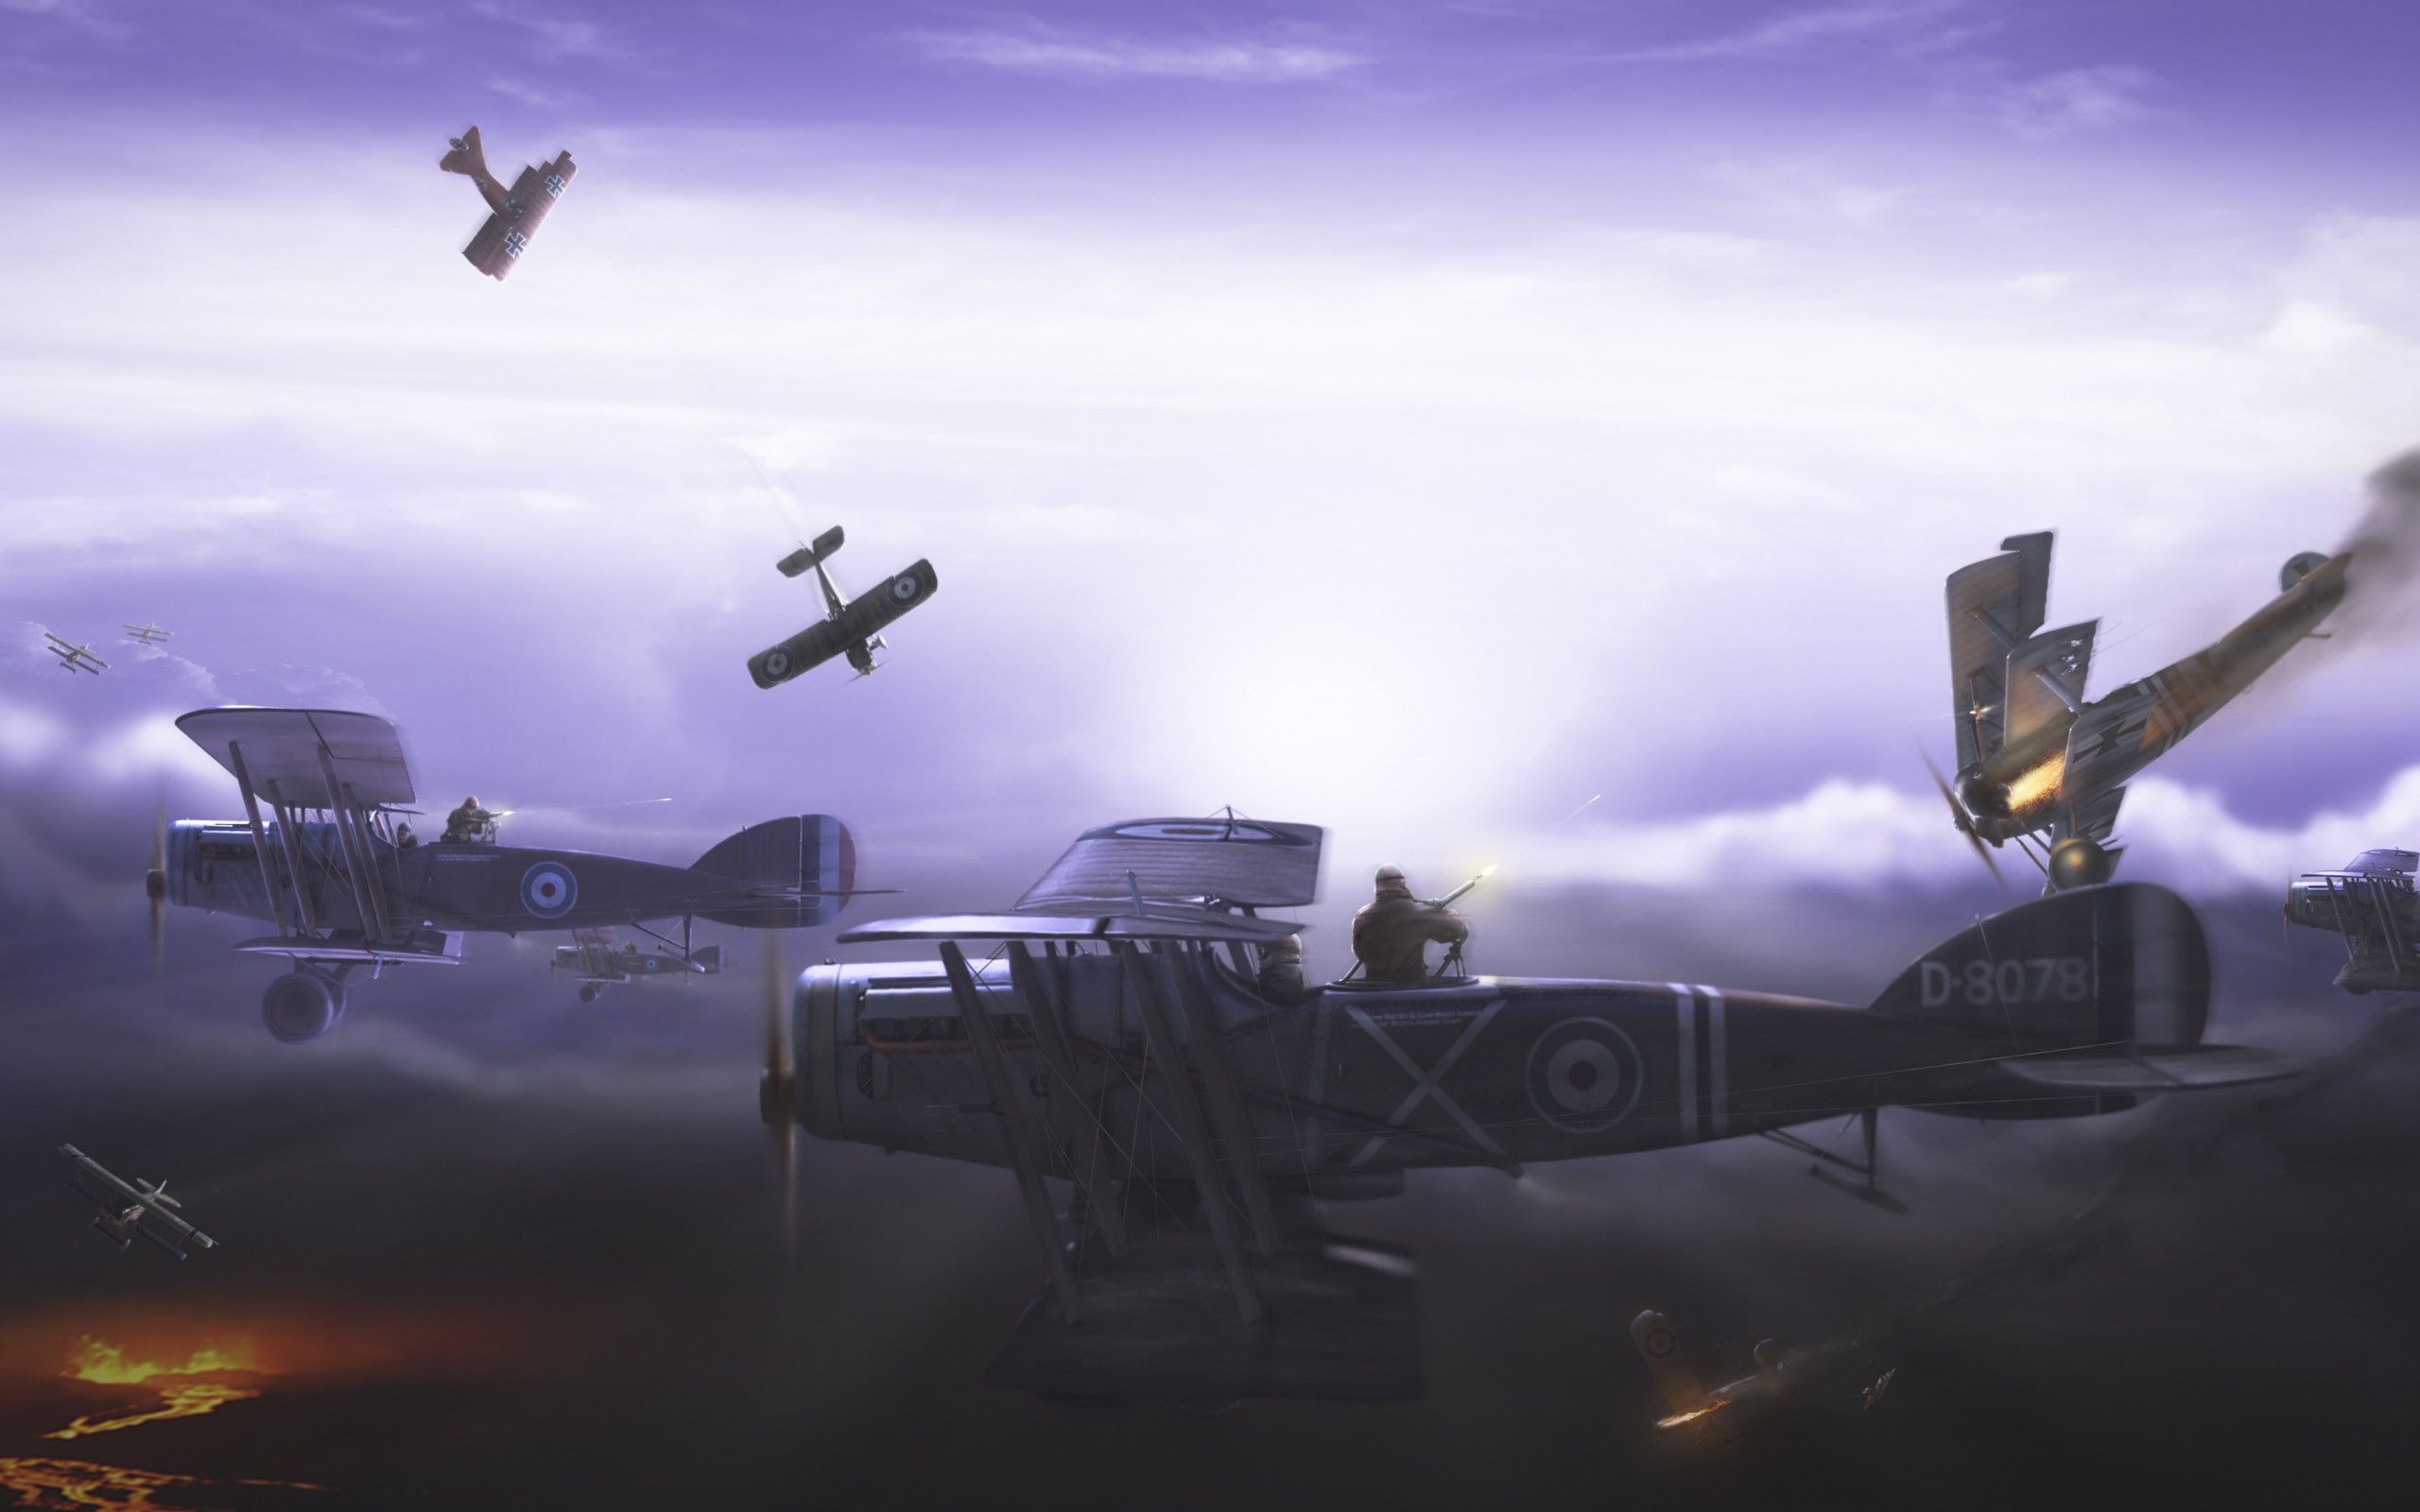 dogfight, The, First, World, War, Planes, Shooting, Night